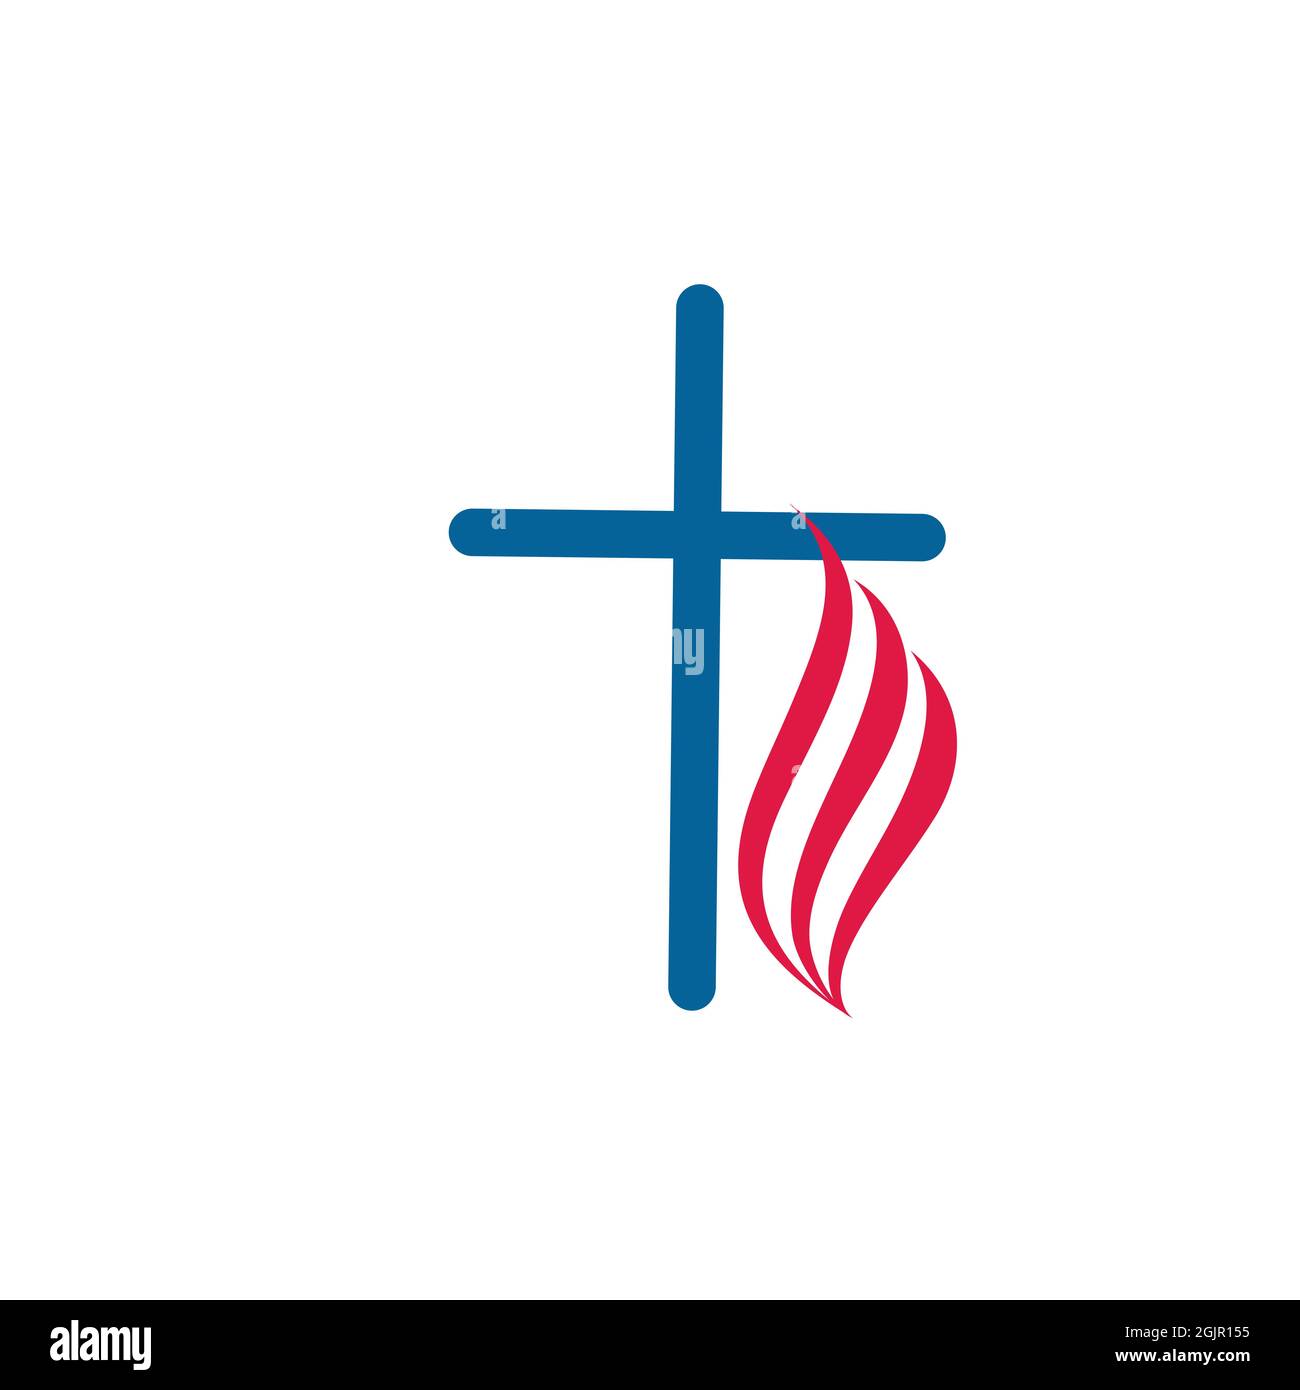 Cross on fire christian church logo. Vector icon for christian organizations. Fire sign in a shape of cross. Isolated abstract graphic design template Stock Vector